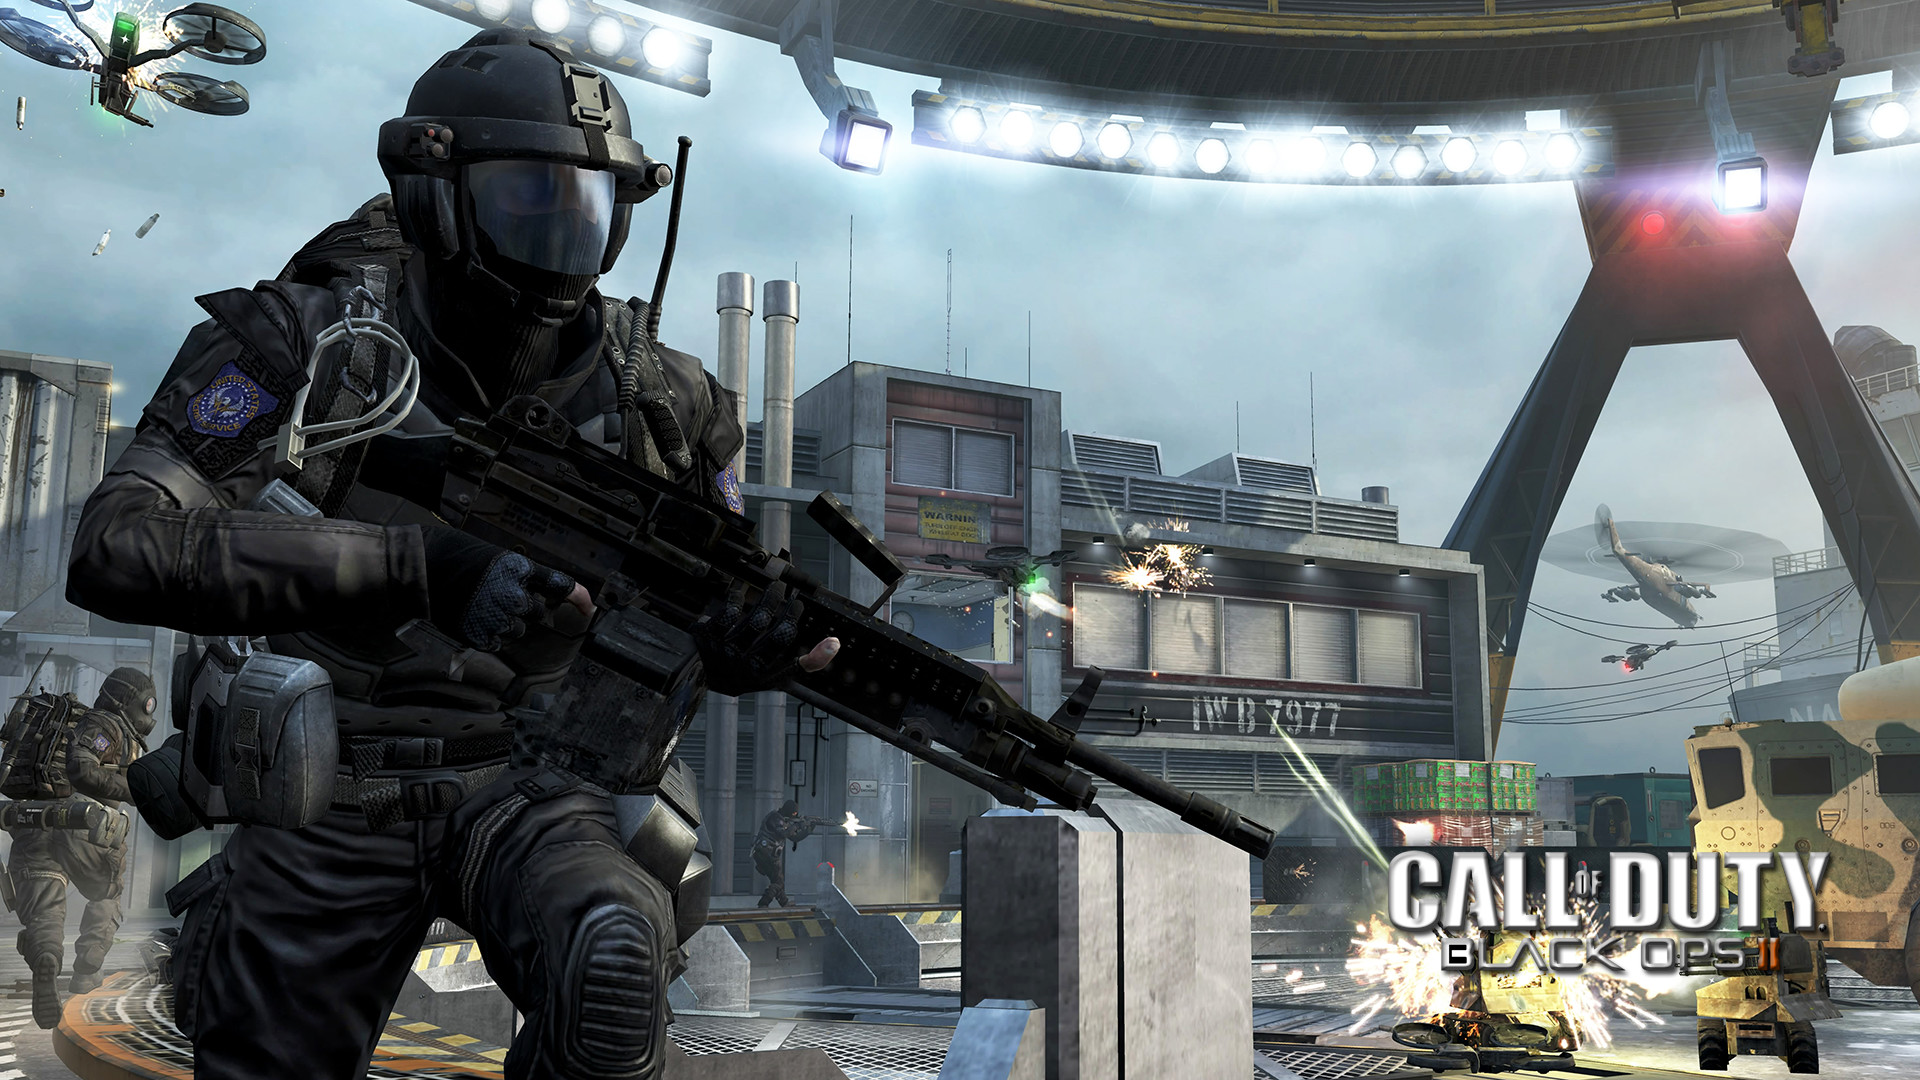 1920x1080 Black Ops 2 Backgrounds HD.